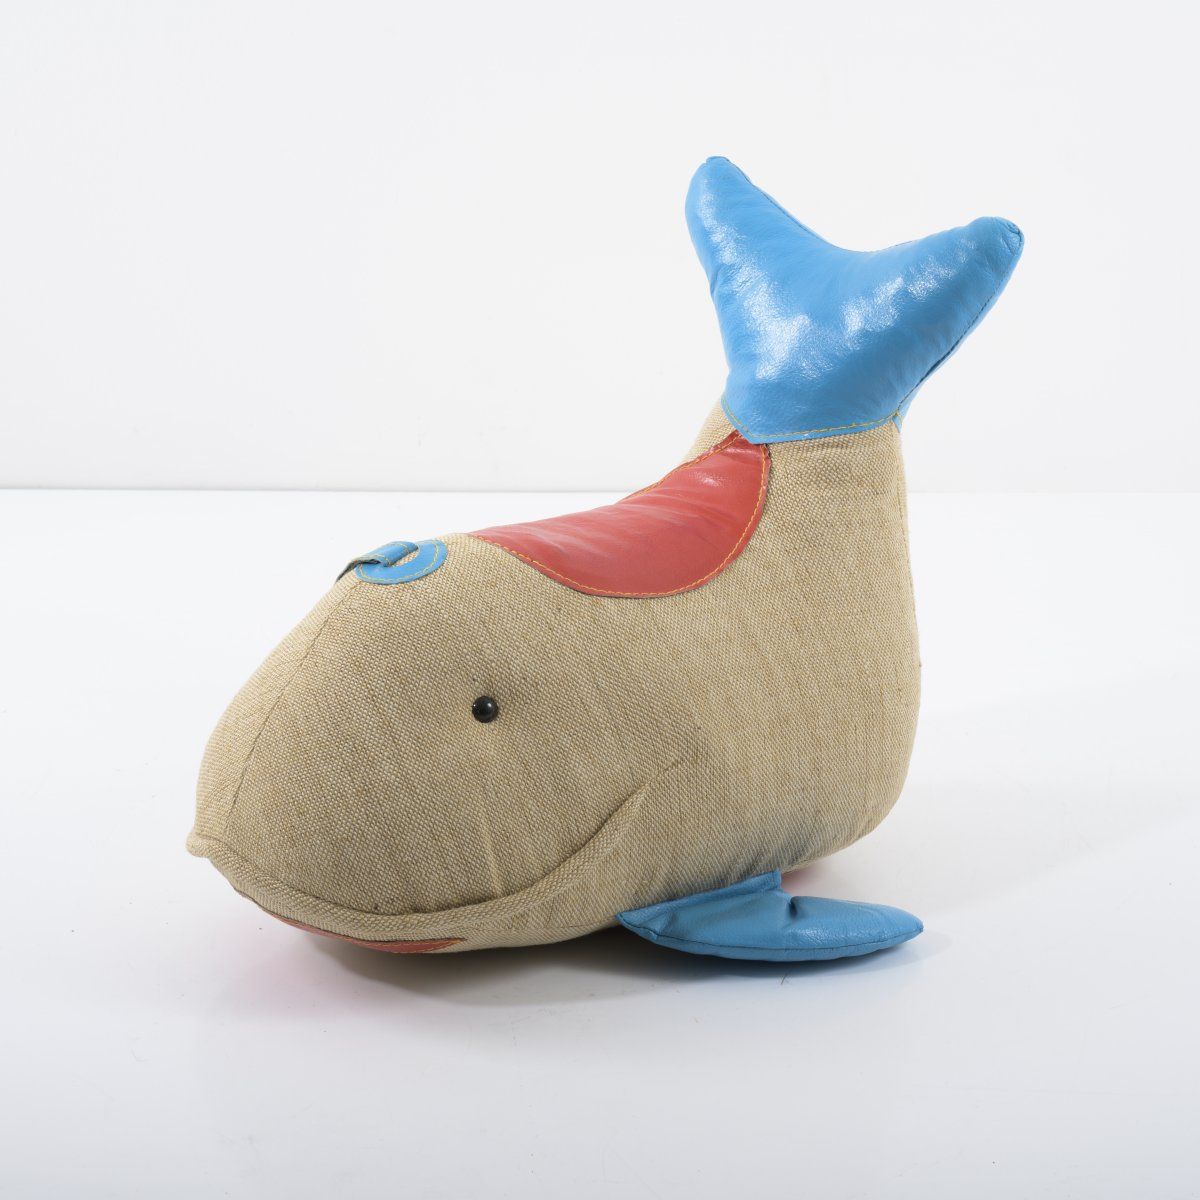 Null Renate Müller, Whale, 1972, H. 51.5 x 56,5 x 53 cm. Made by Renate Müller, &hellip;